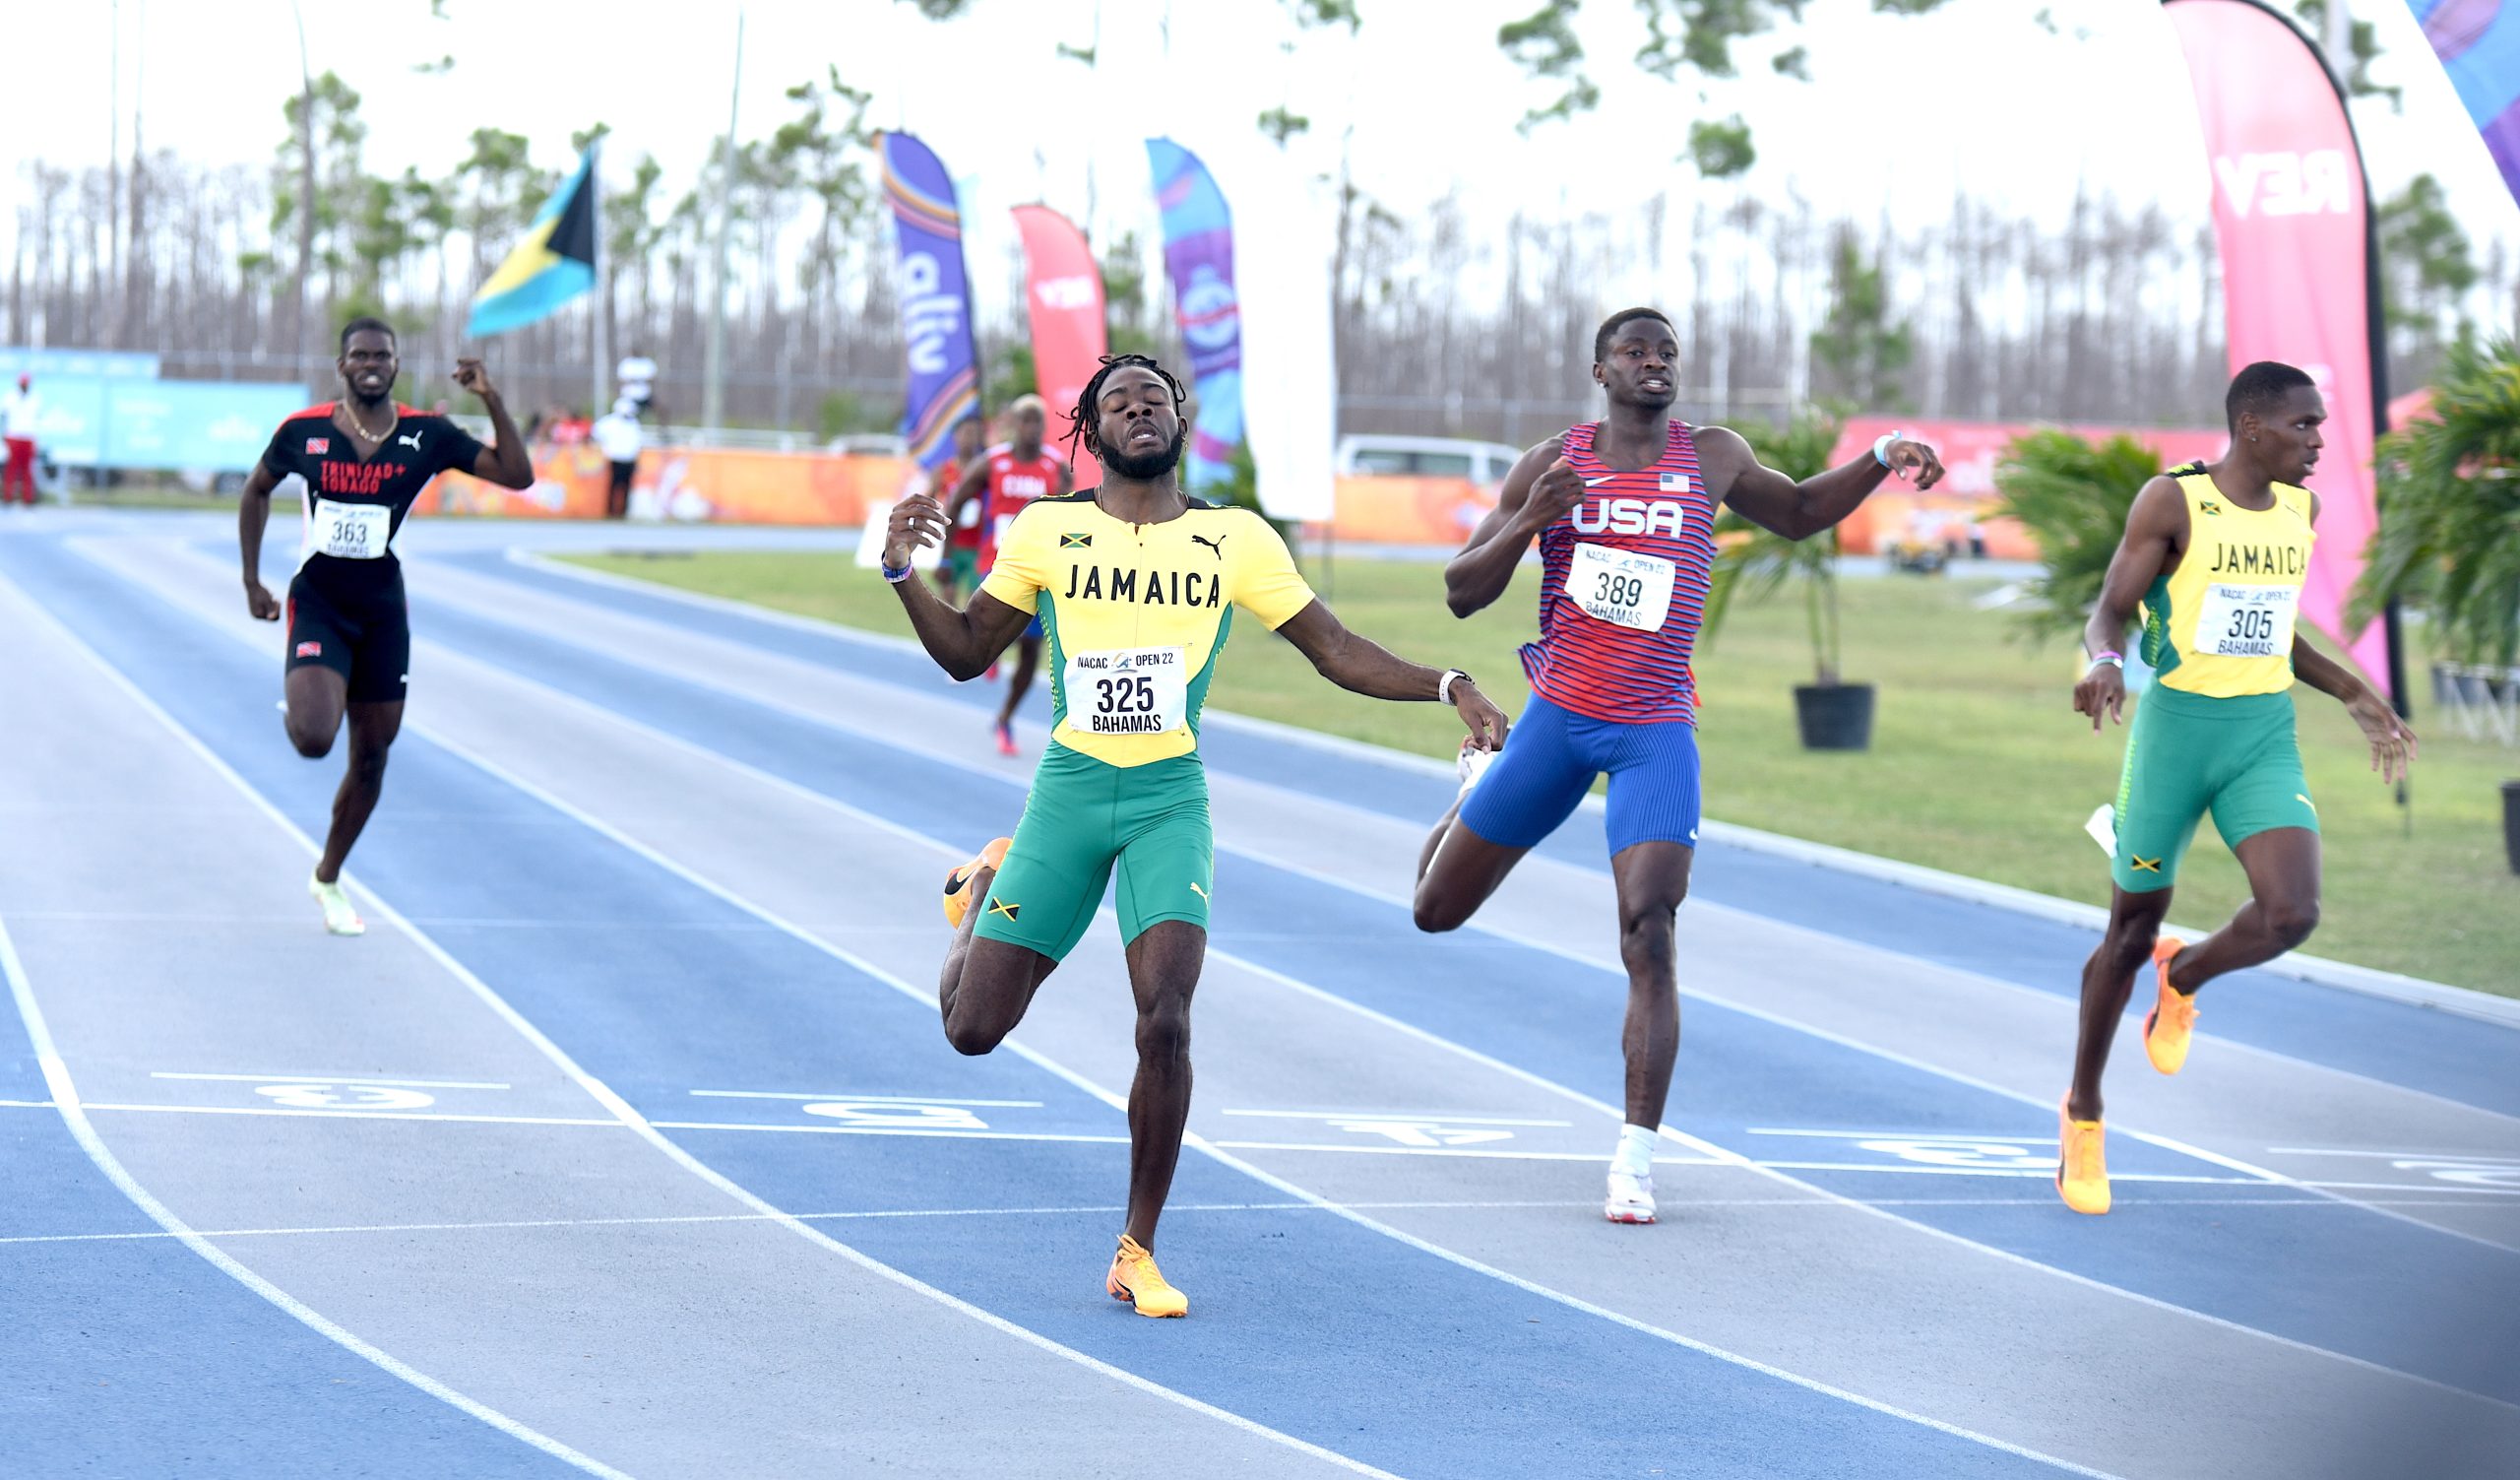 Christopher Taylor wins the men's 400m at the NACAC Open Championships